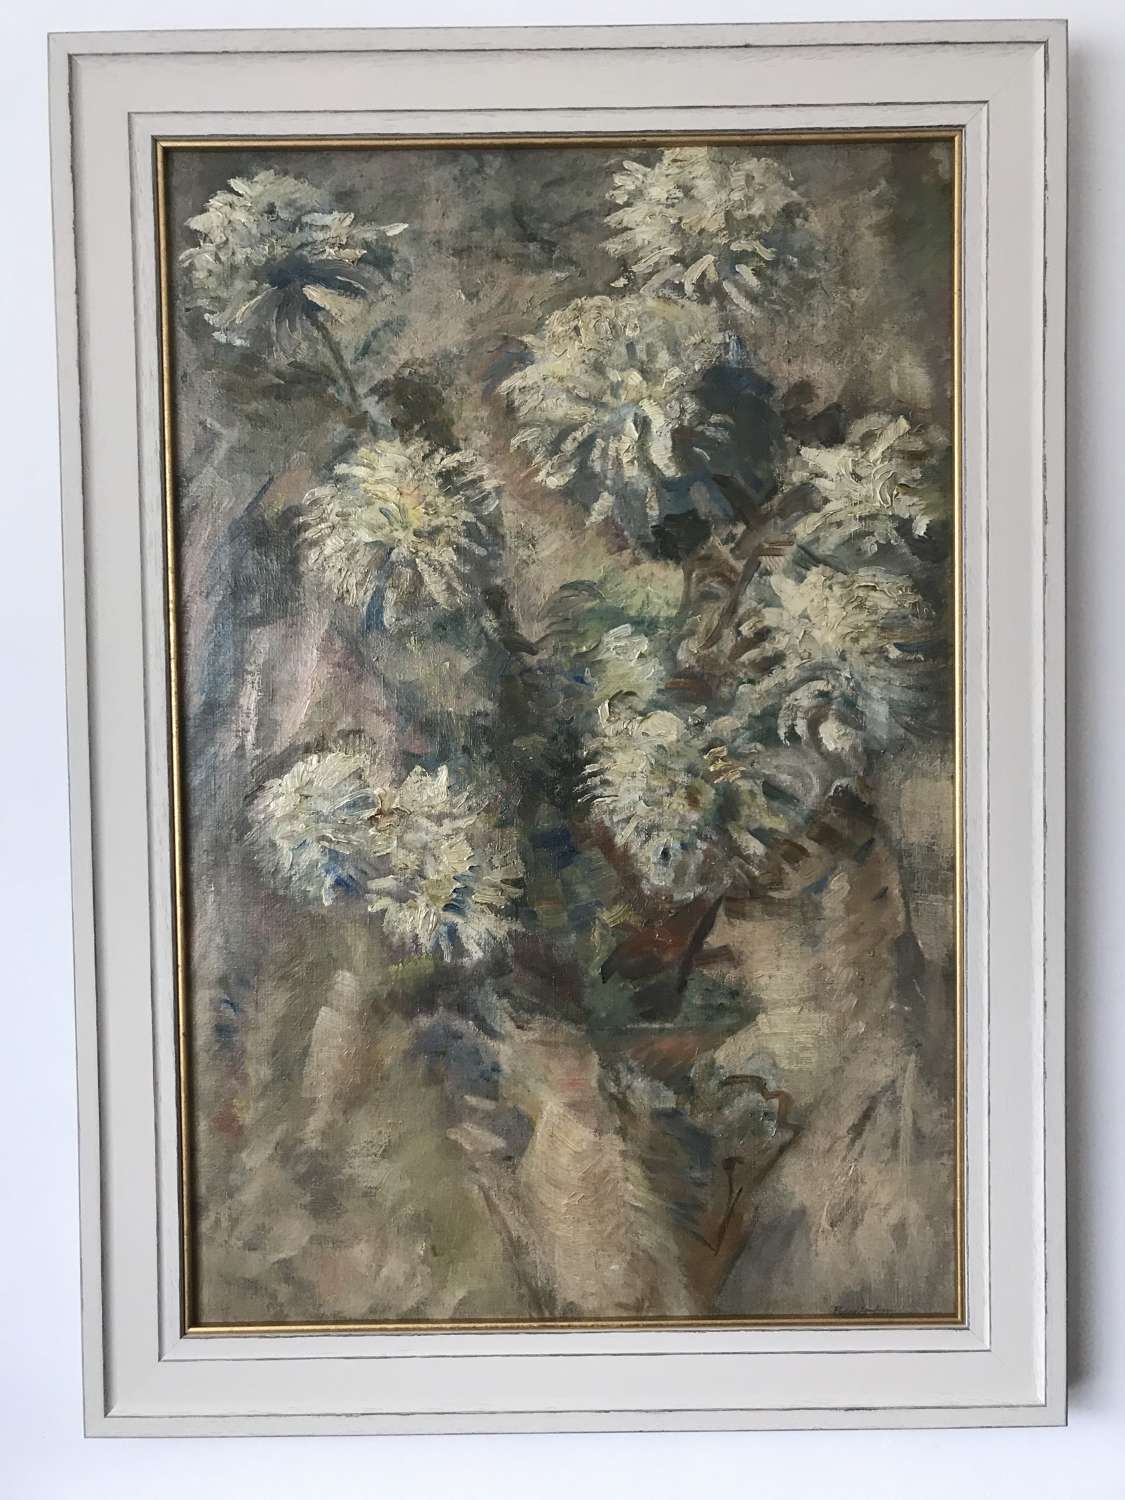 Large mid century Floral oil painting of Dahlias. Signed